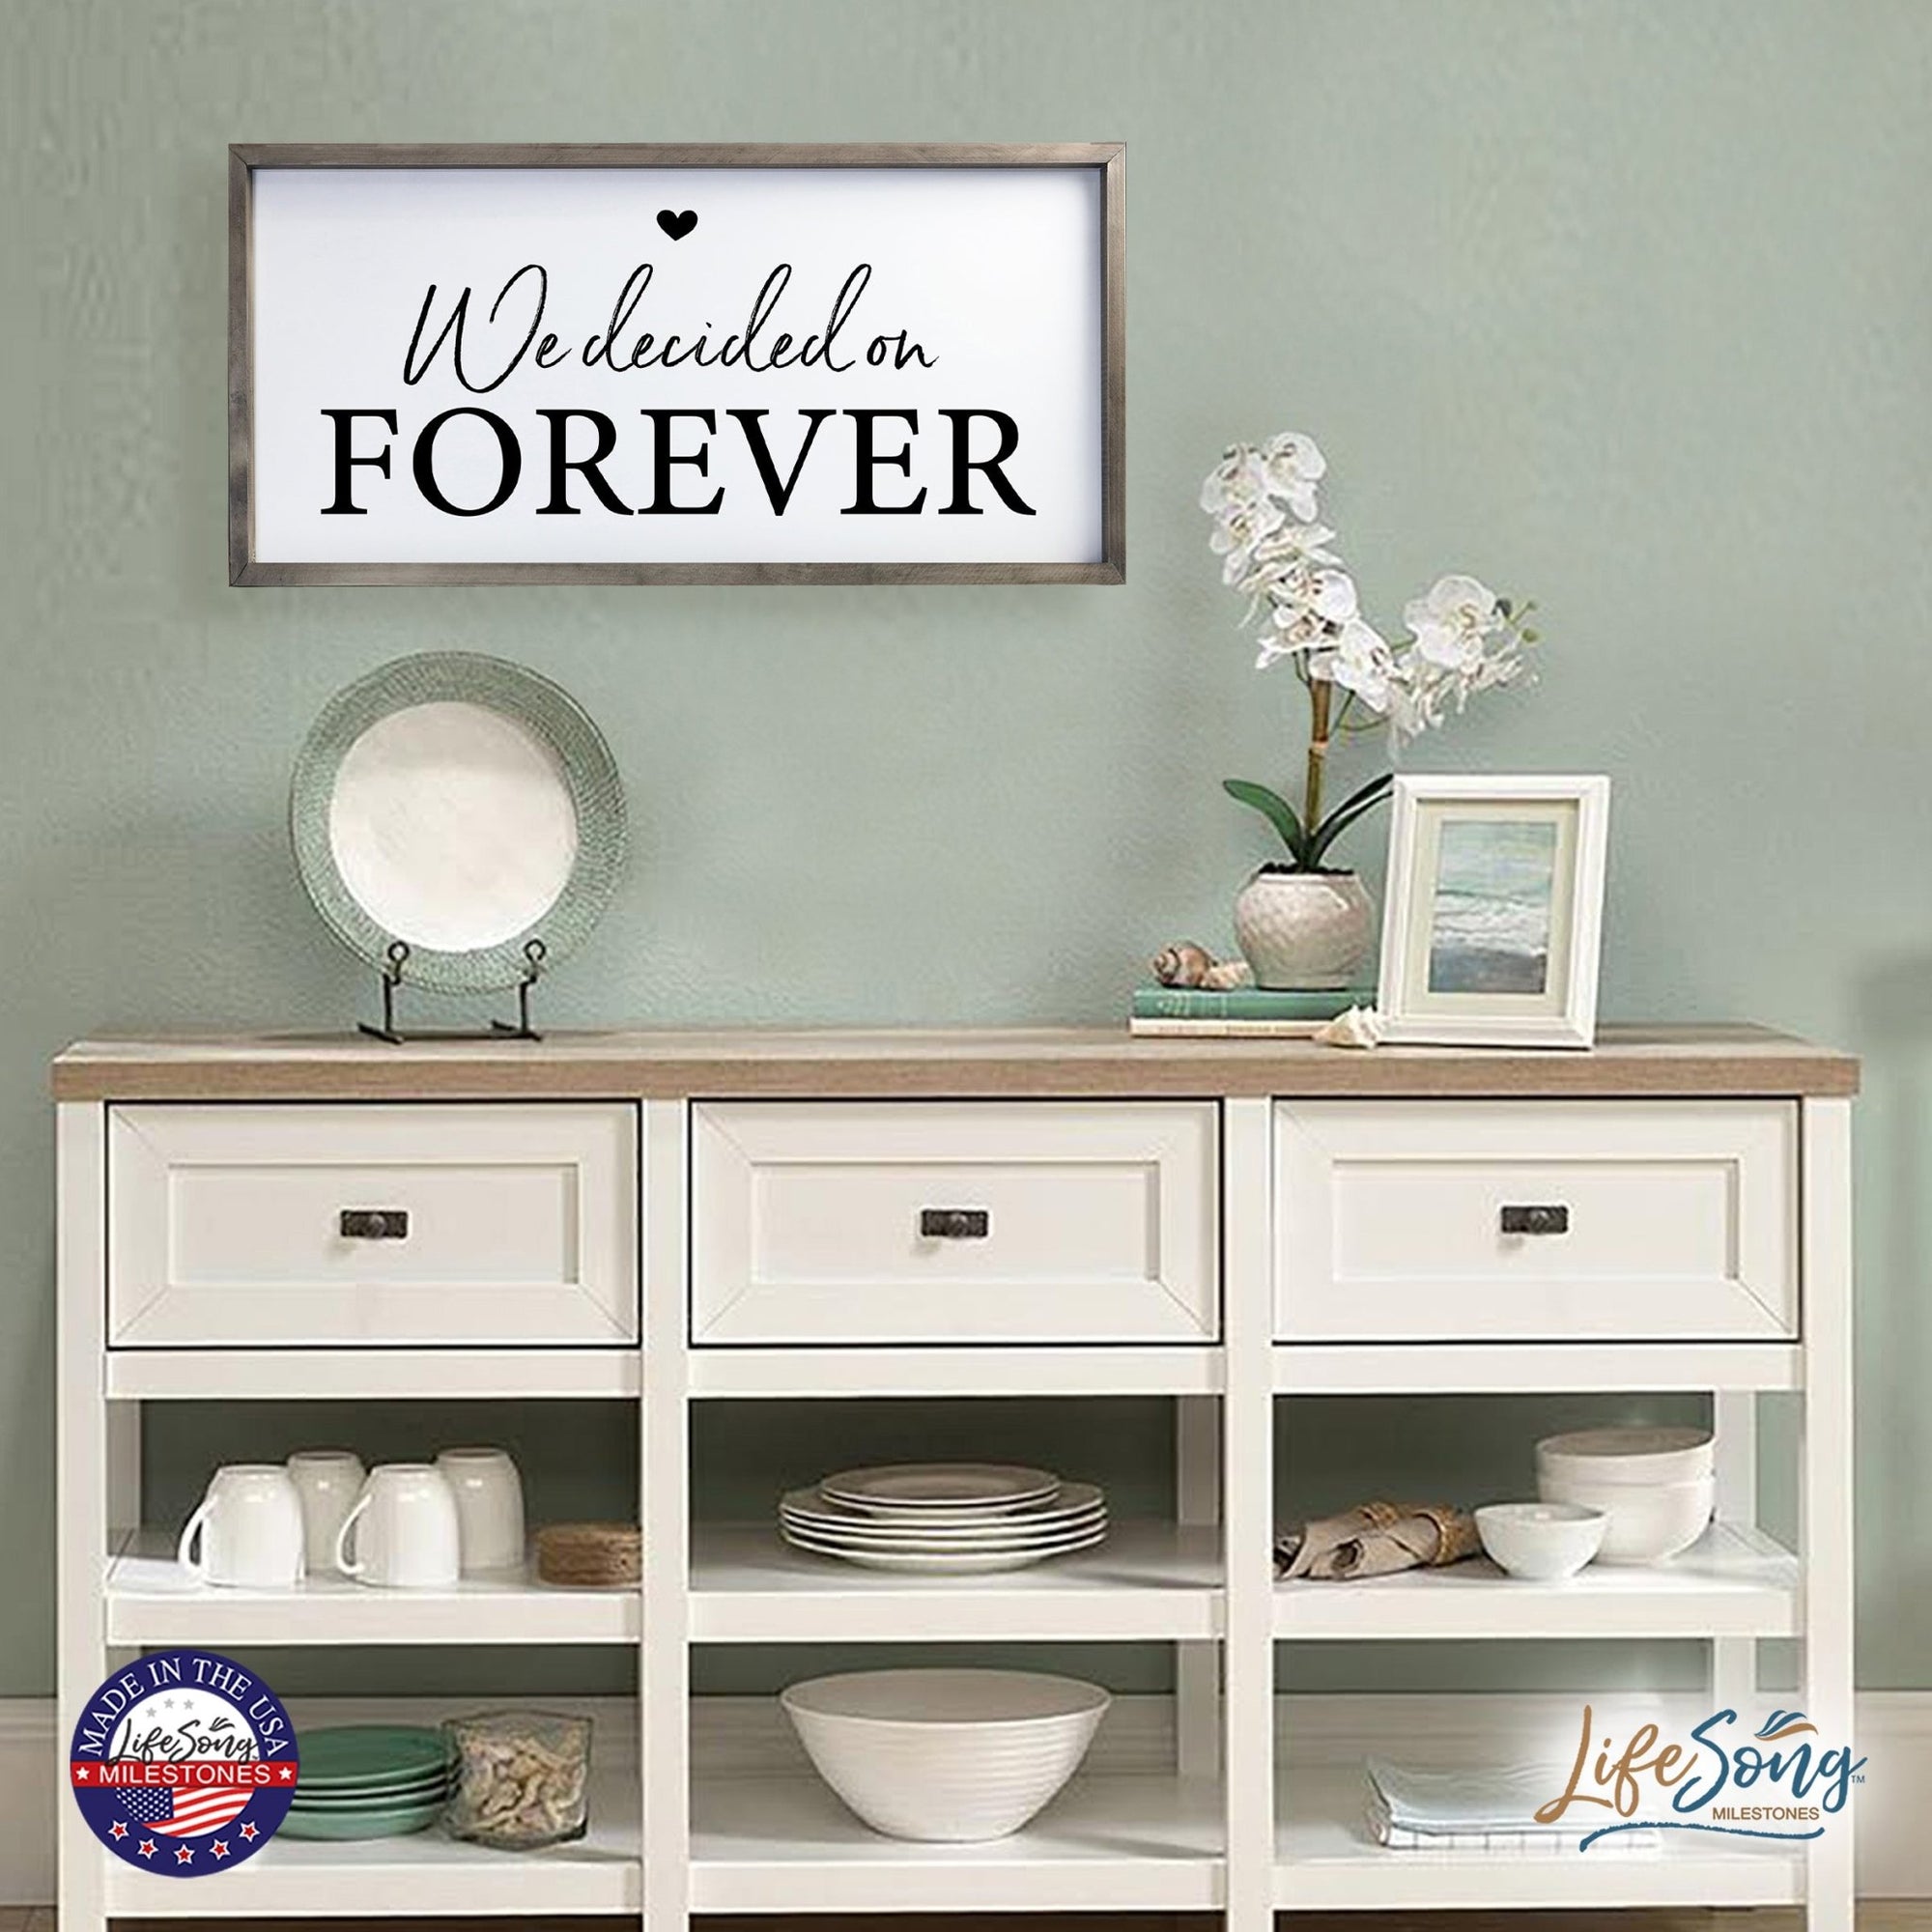 Large Family Wall Decor Quote Sign For Home 18 x 36 - We Decided On Forever - LifeSong Milestones